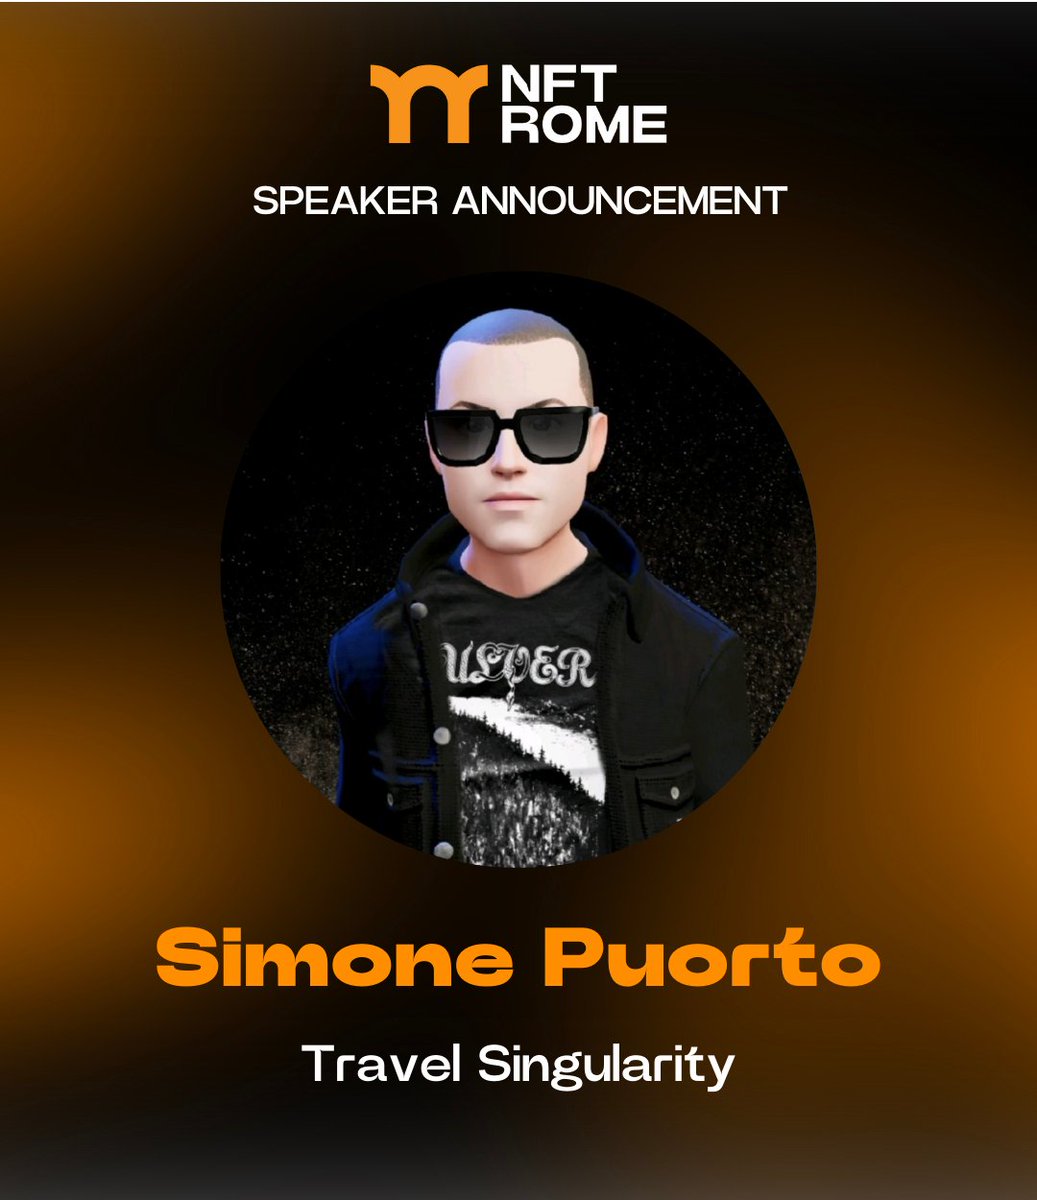 🚨Speaker Announcement 🚨 We are excited to announce that @puortosimone from Travel Singularity will be speaking at NFT Rome. 🇮🇹 He will be presenting his latest book 'We are the glitch' sharing super interesting insights on how web3 is changing the travel industry.